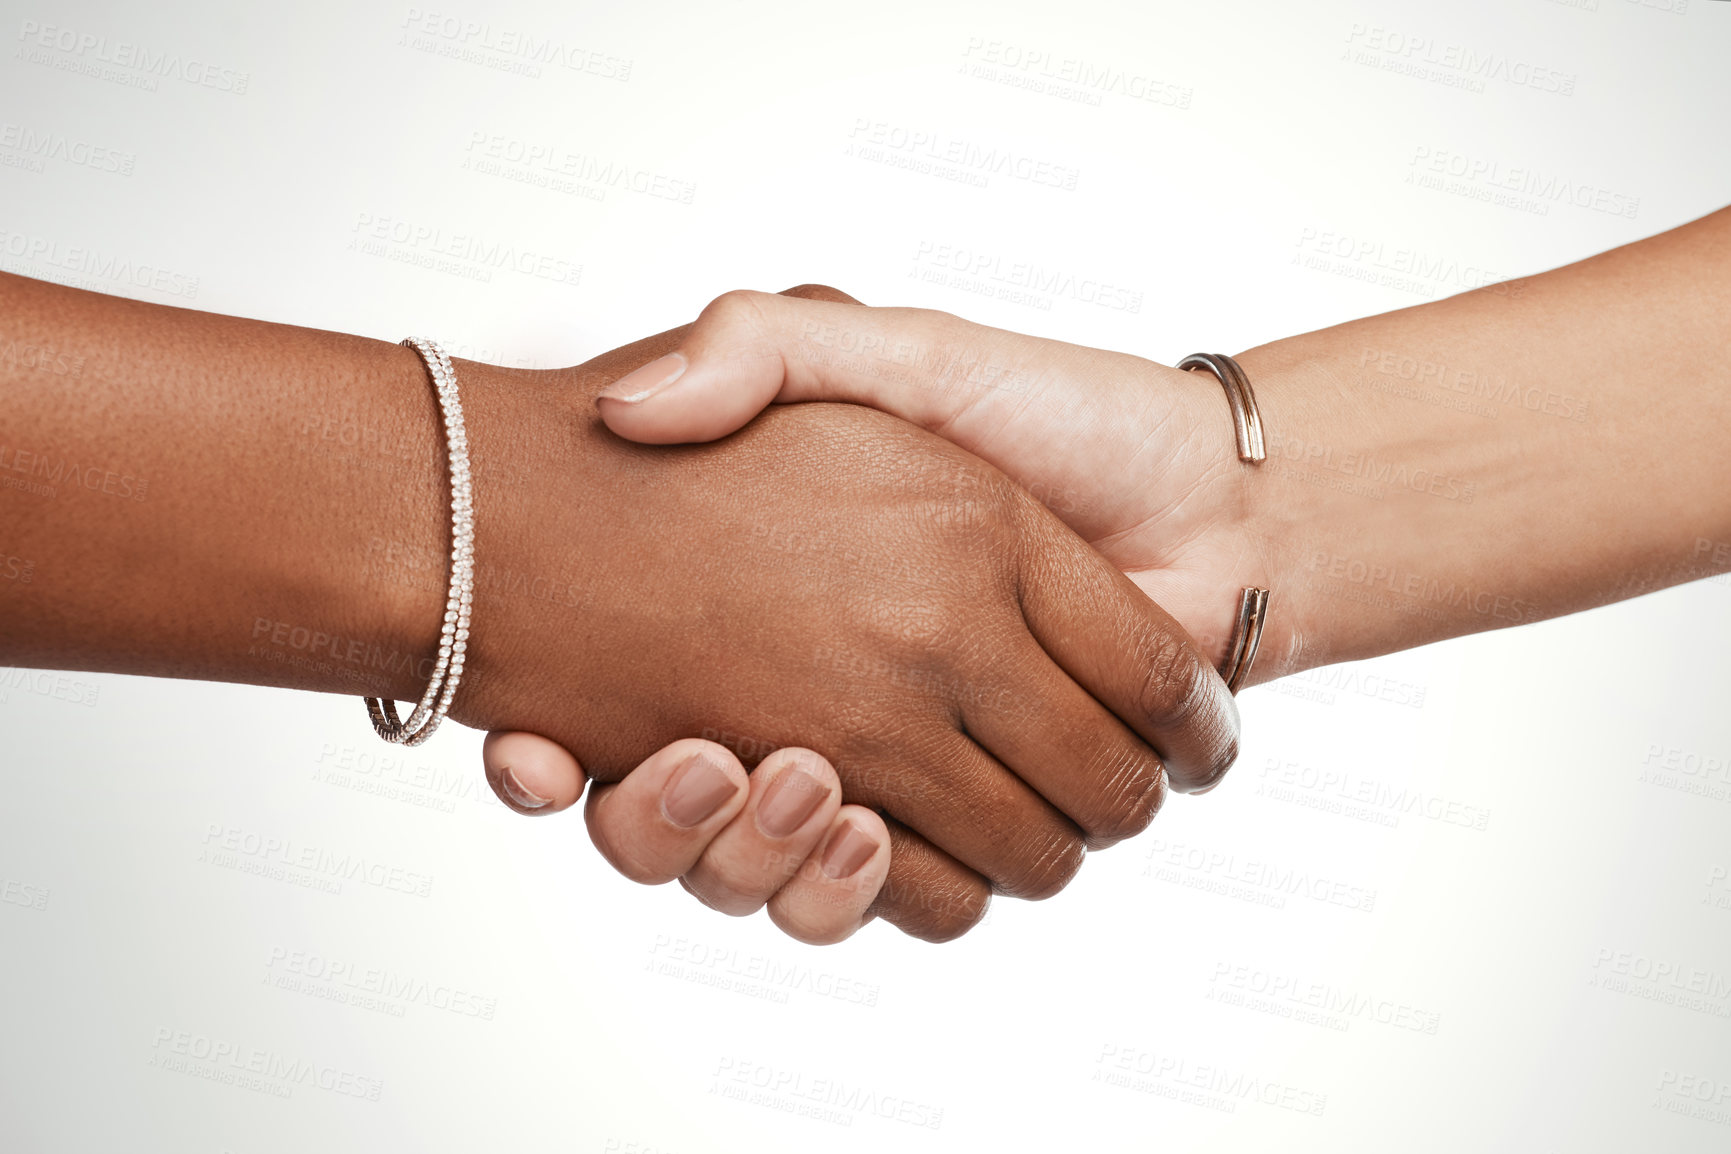 Buy stock photo Cropped shot of two unrecognizable women shaking hands in the studio